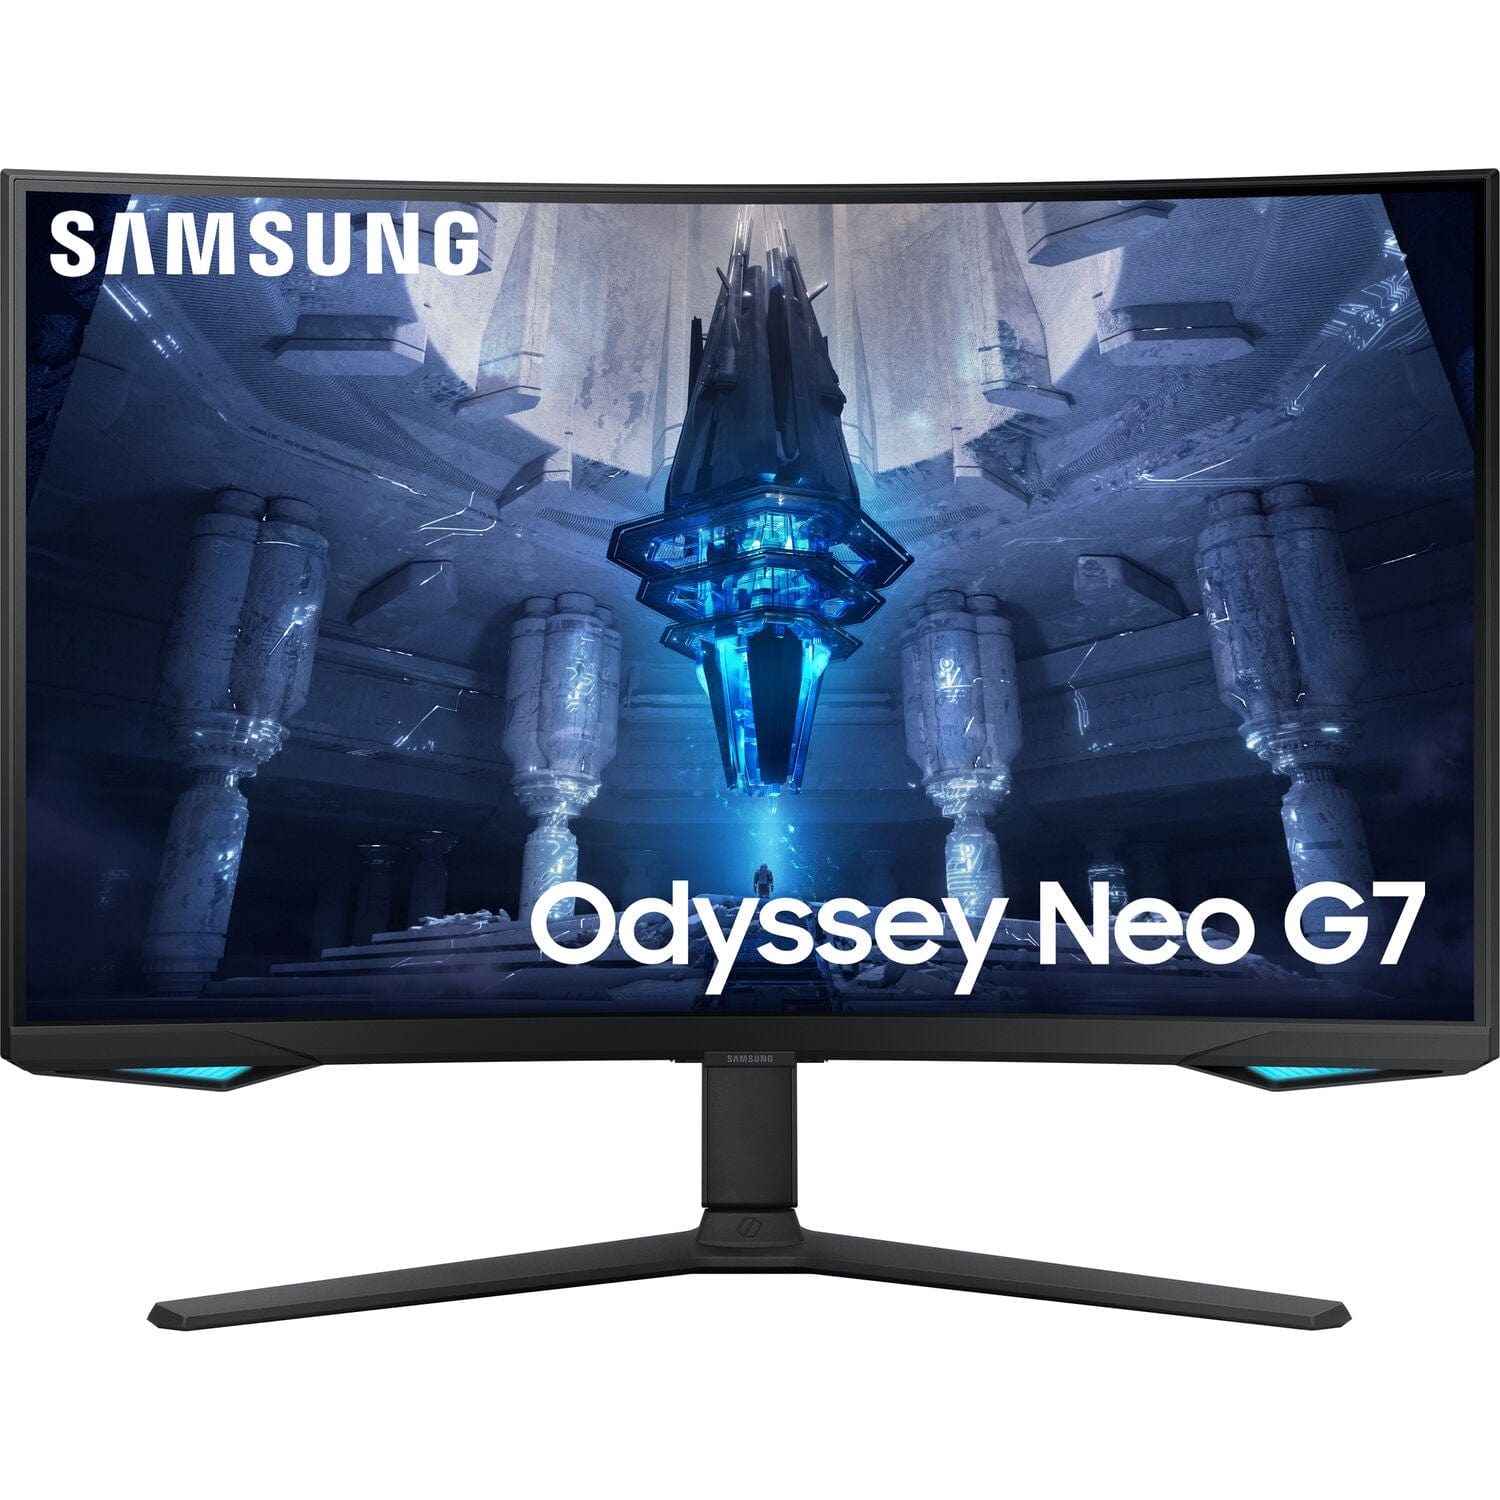 Samsung 32" Odyssey Neo G7 3840x2160 165Hz UHD Curved Gaming Monitor - Certified Refurbished